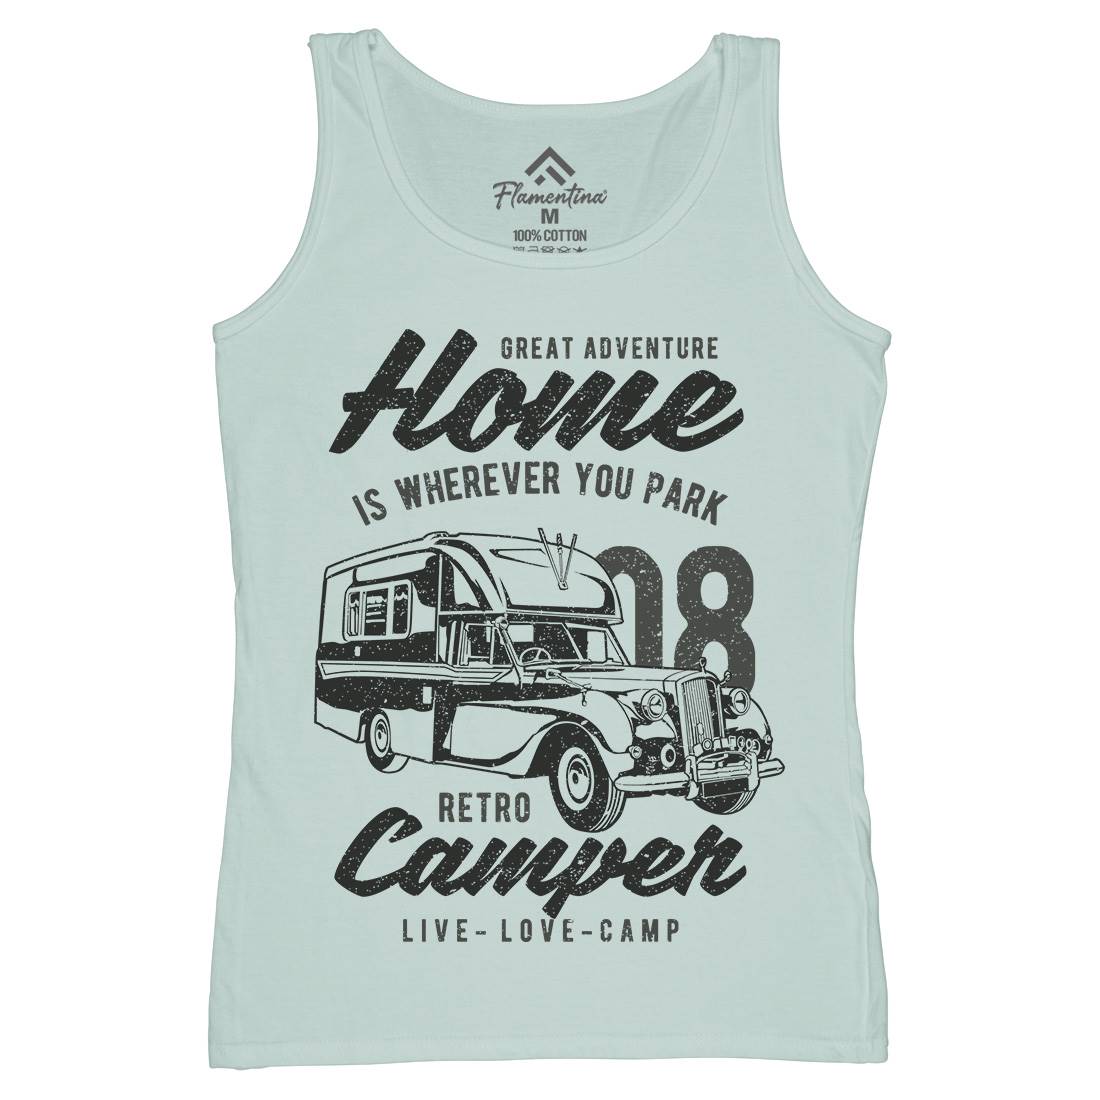 Retro Campers Womens Organic Tank Top Vest Nature A740